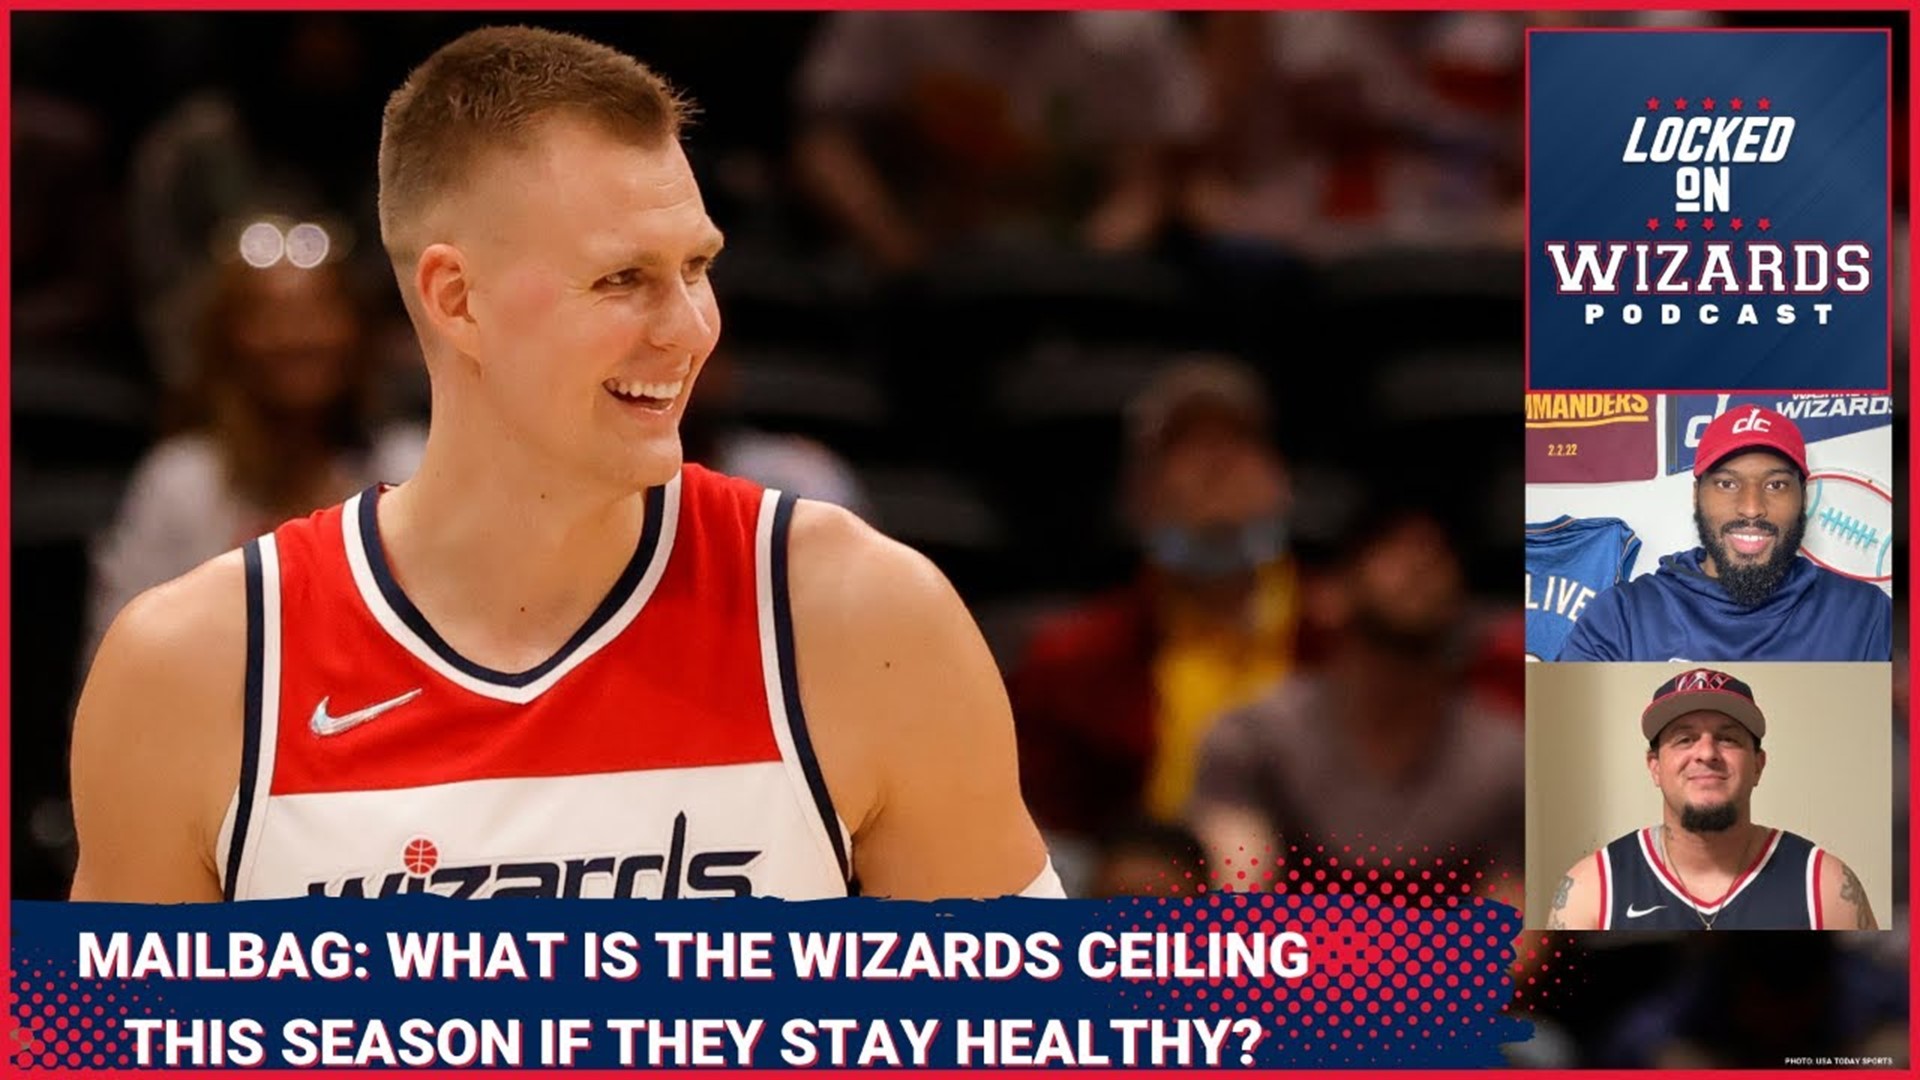 Ed Oliver & Brandon Scott talk about the Wizards ceiling it the Wizards stay healthy this season.